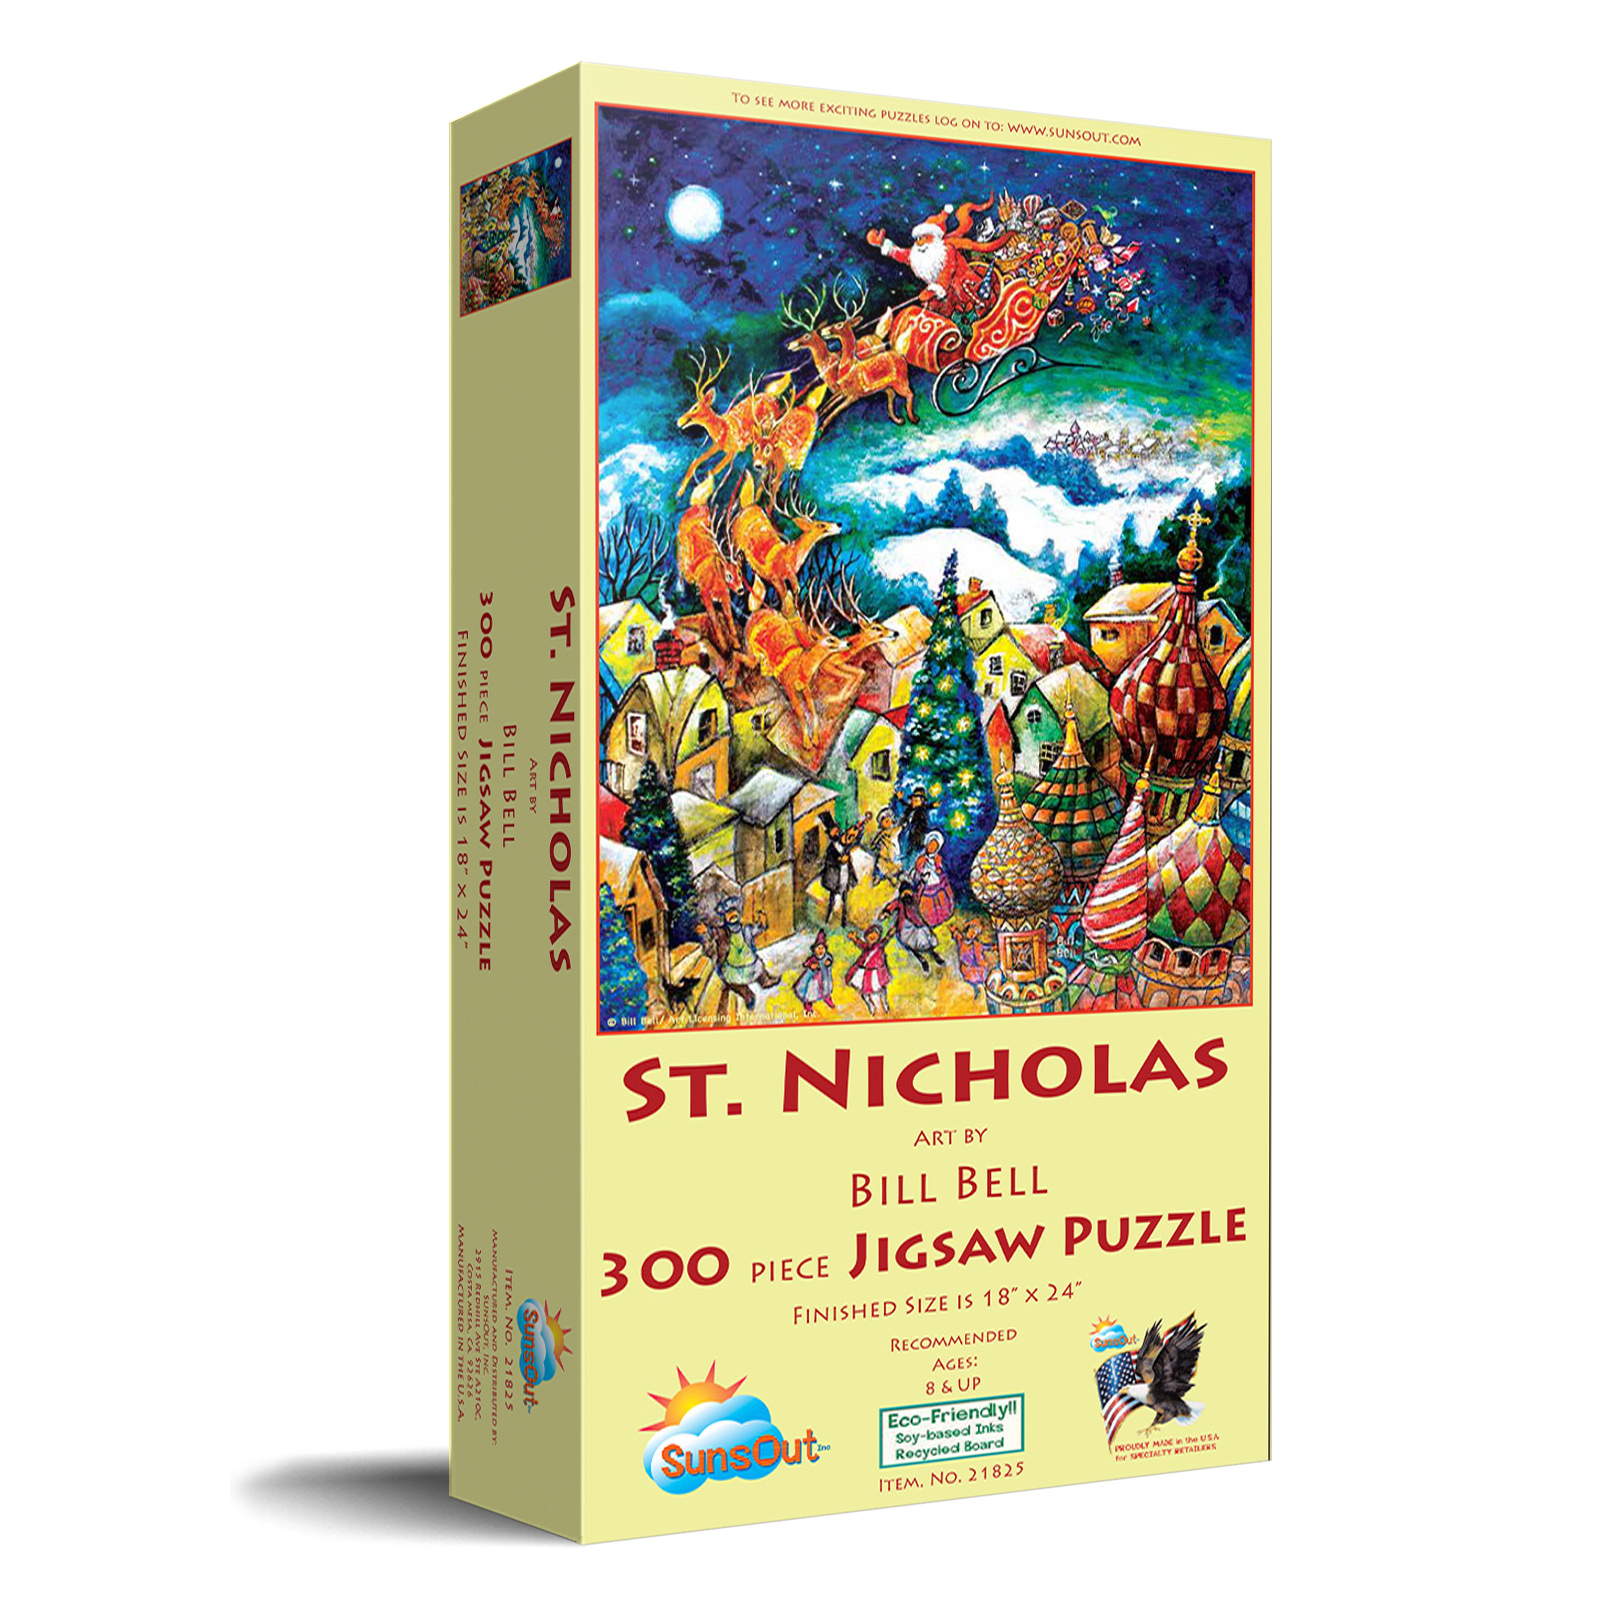 SUNSOUT INC - St. Nicholas - 300 pc Jigsaw Puzzle by Artist: Bill Bell - Finished Size 18" x 24" Christmas - MPN# 21825 - image 2 of 5